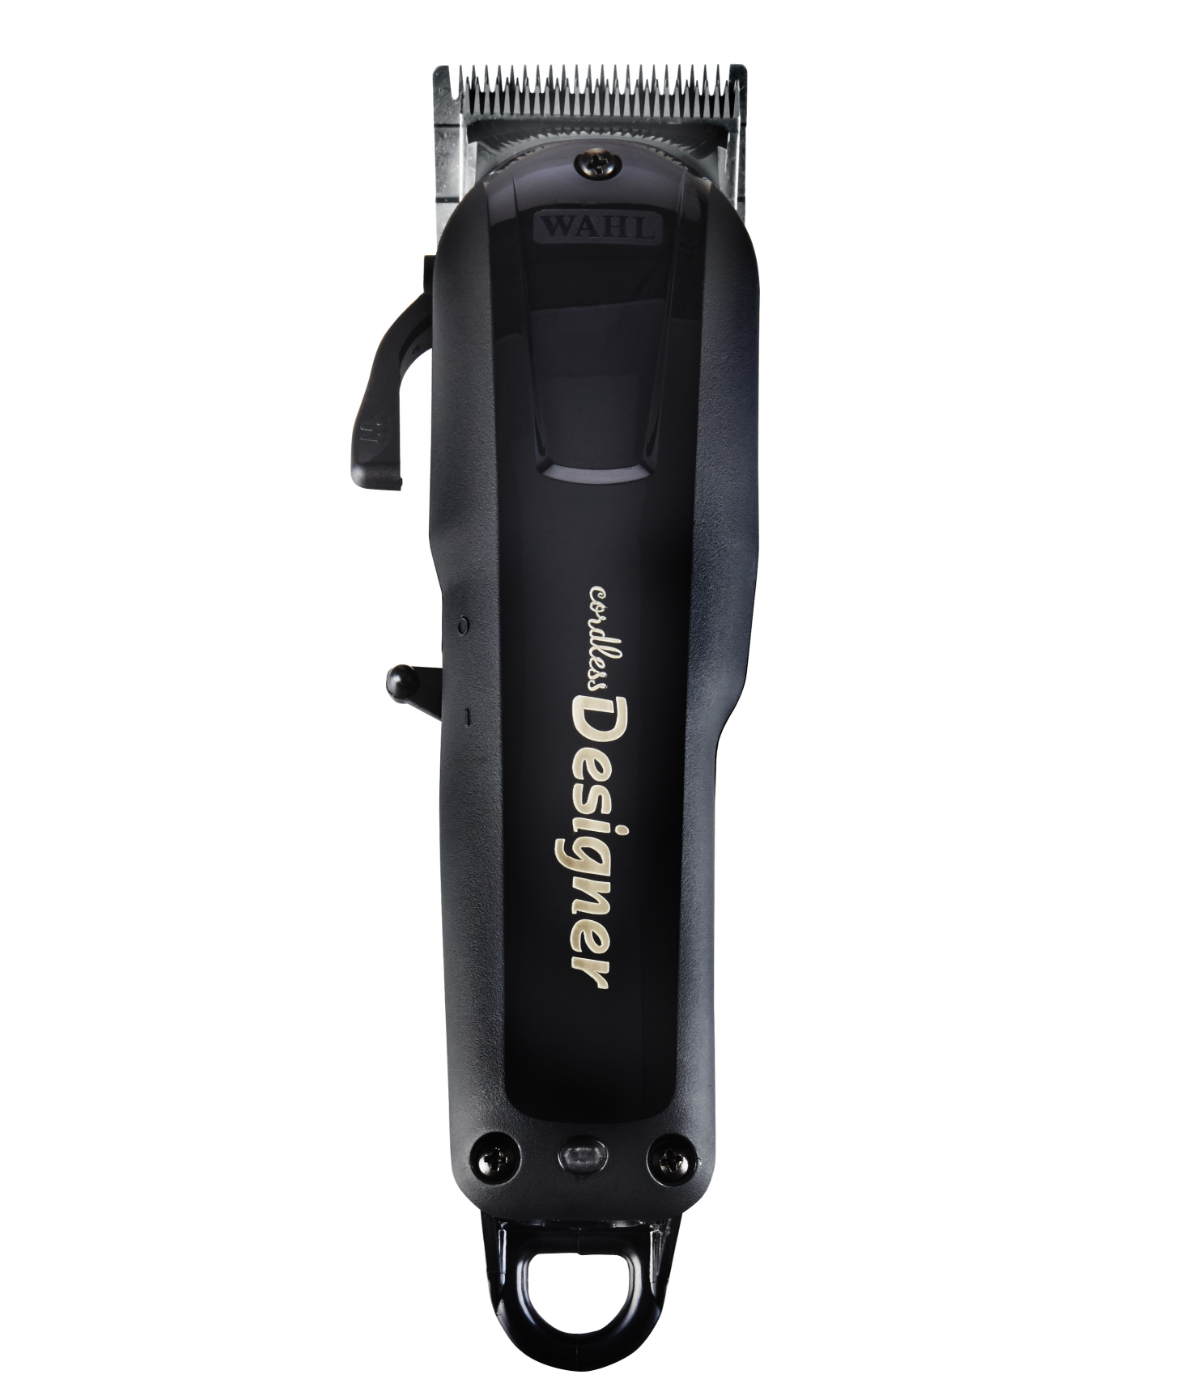 Cordless Designer Clipper by Wahl | Hair Clippers and Beard Trimmers – Pro  Beauty Supplies